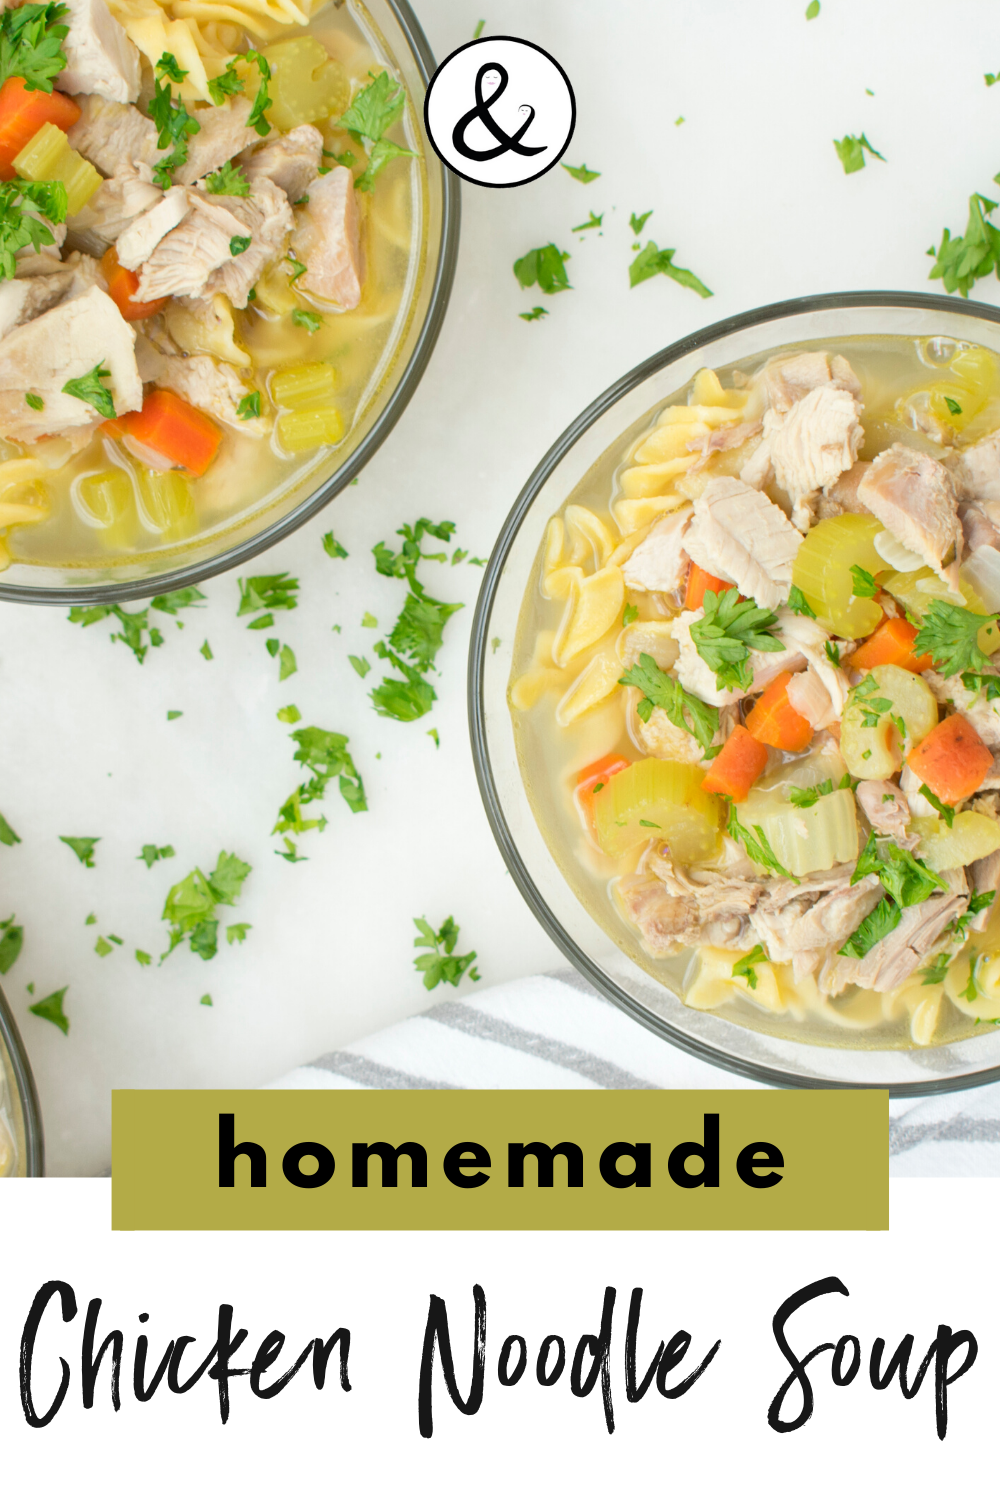 Homemade Chicken Noodle Soup From Scratch